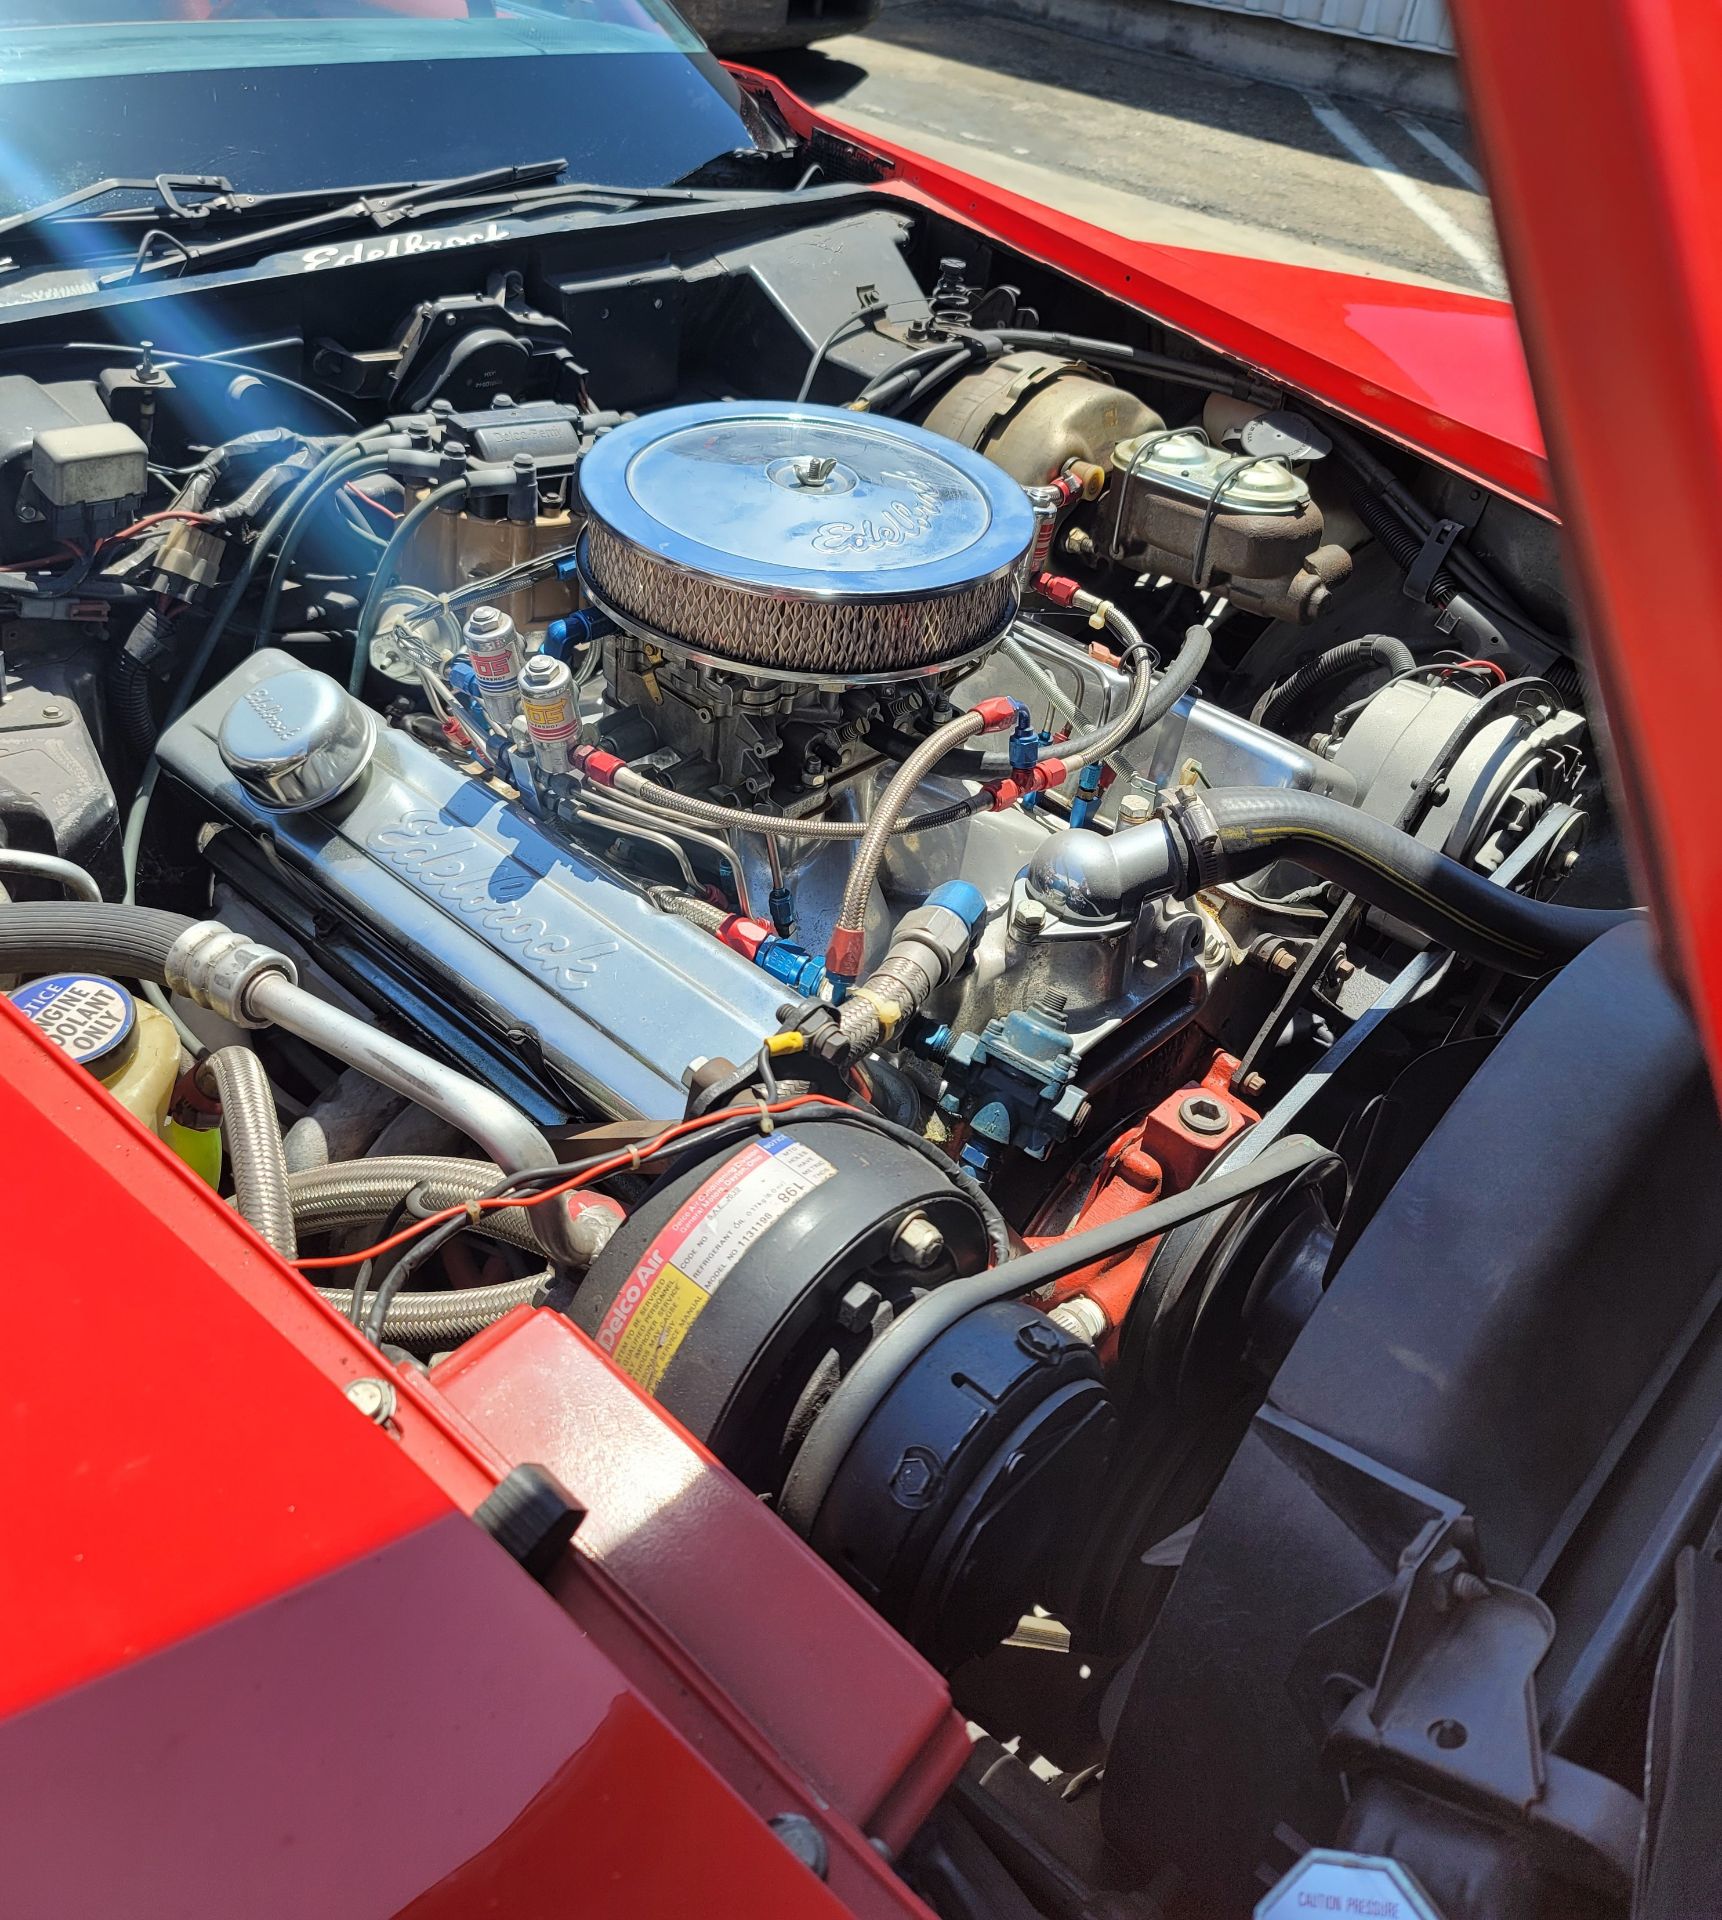 1980 CHEVROLET CORVETTE, WAS VIC EDELBROCK'S PERSONAL CAR BOUGHT FOR R&D, RED INTERIOR, TITLE ONLY. - Image 29 of 70